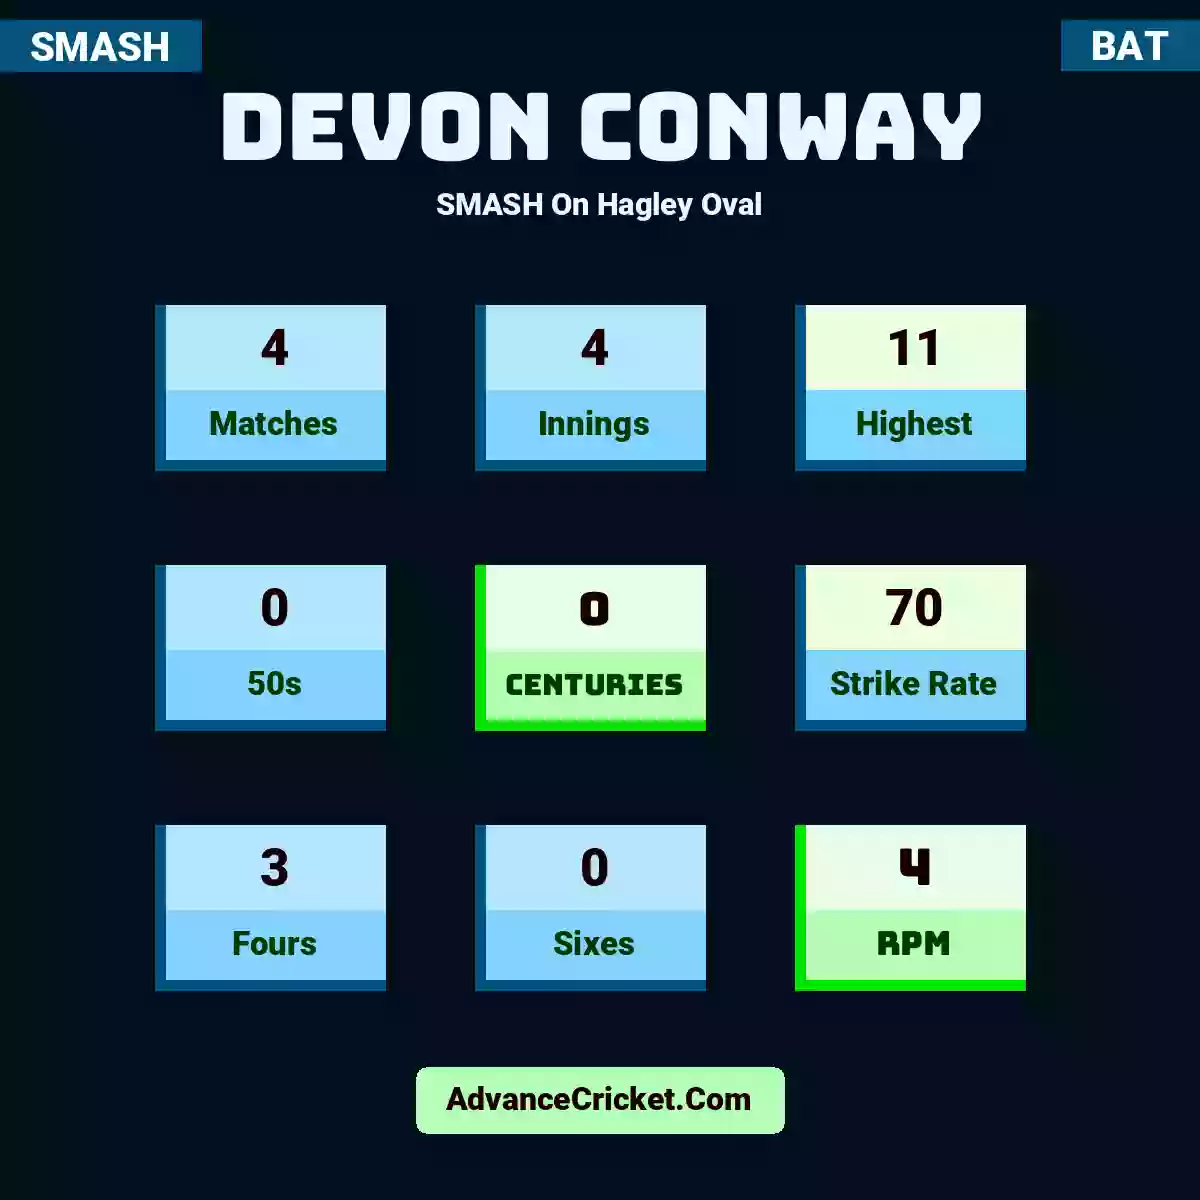 Devon Conway SMASH  On Hagley Oval, Devon Conway played 4 matches, scored 11 runs as highest, 0 half-centuries, and 0 centuries, with a strike rate of 70. D.Conway hit 3 fours and 0 sixes, with an RPM of 4.